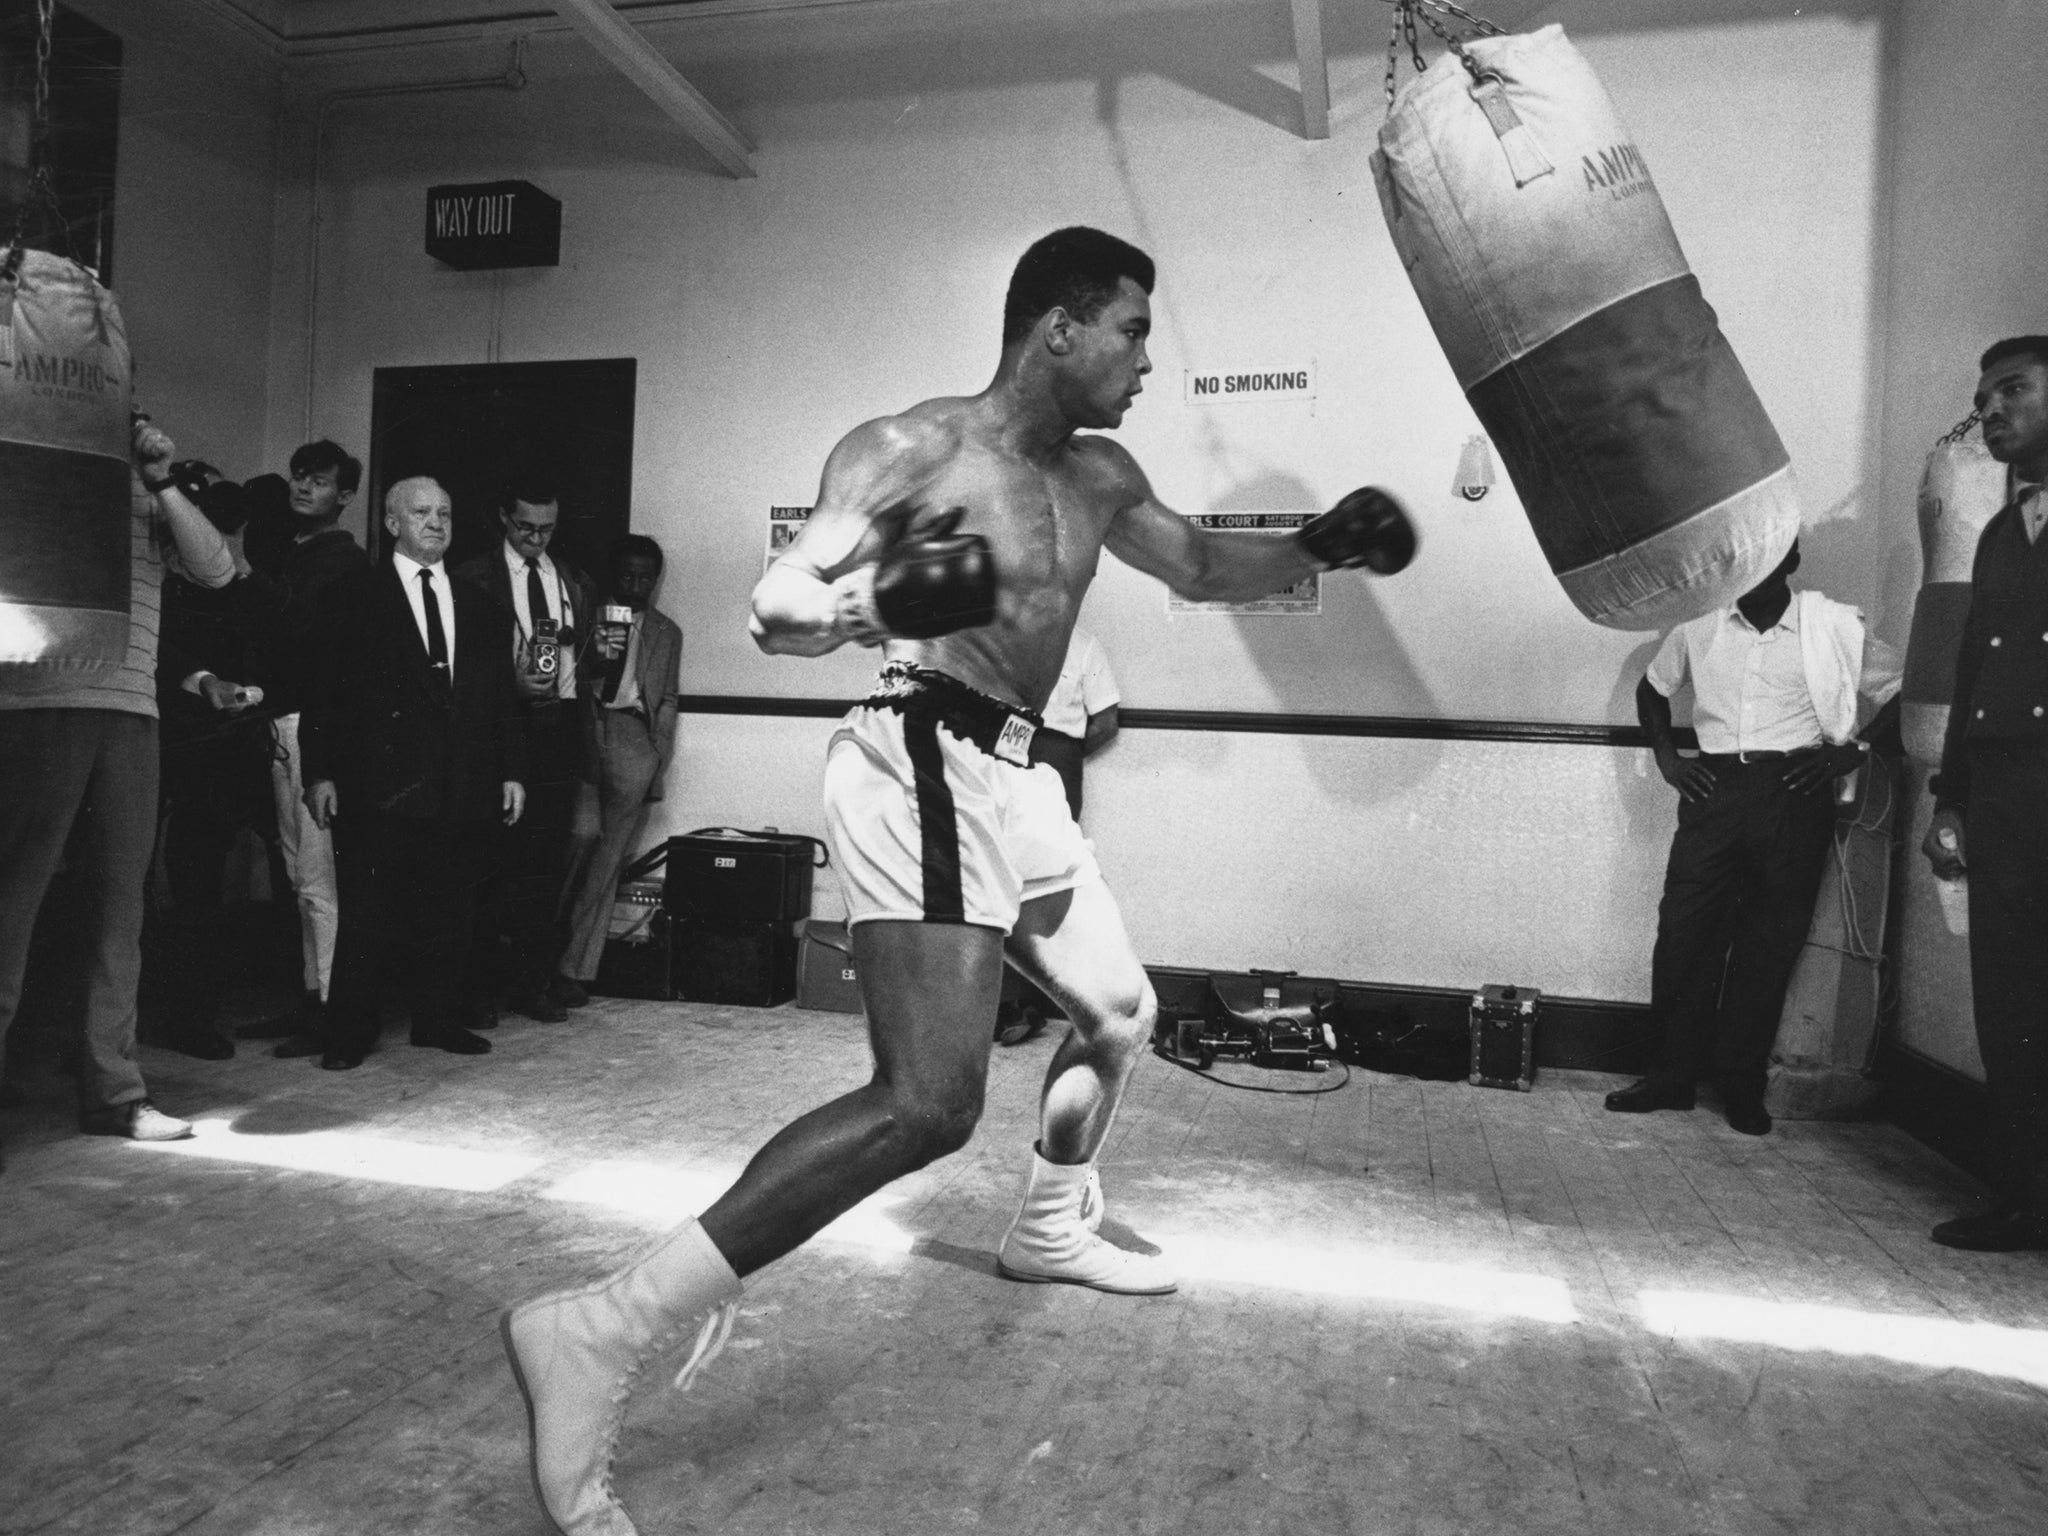 Muhammad Ali was world heavyweight champion until he was stripped of his title in 1967